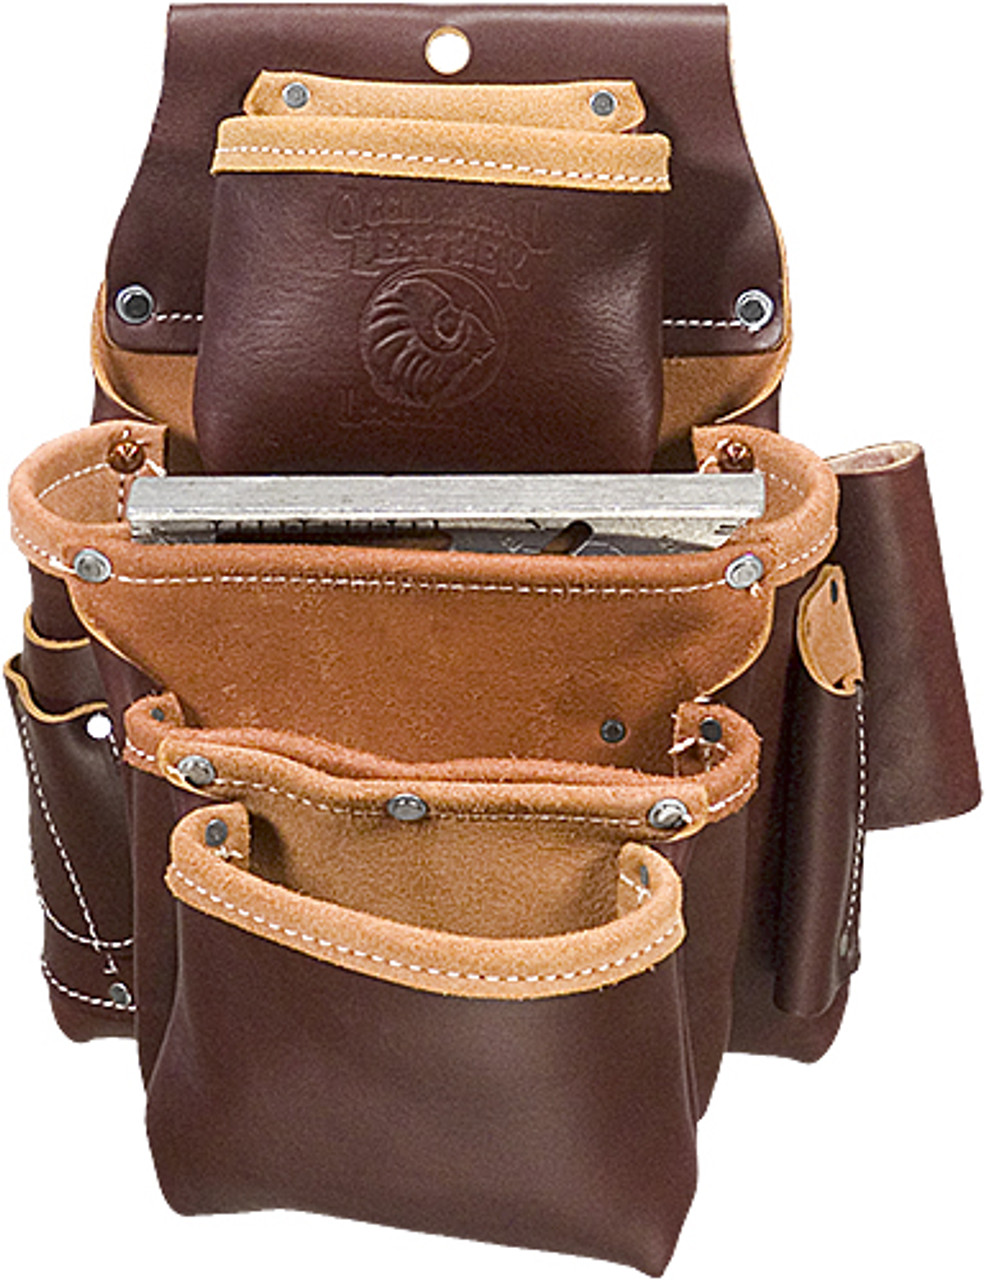 Occidental Leather 5062 - 4 Pouch ProFastener Bag